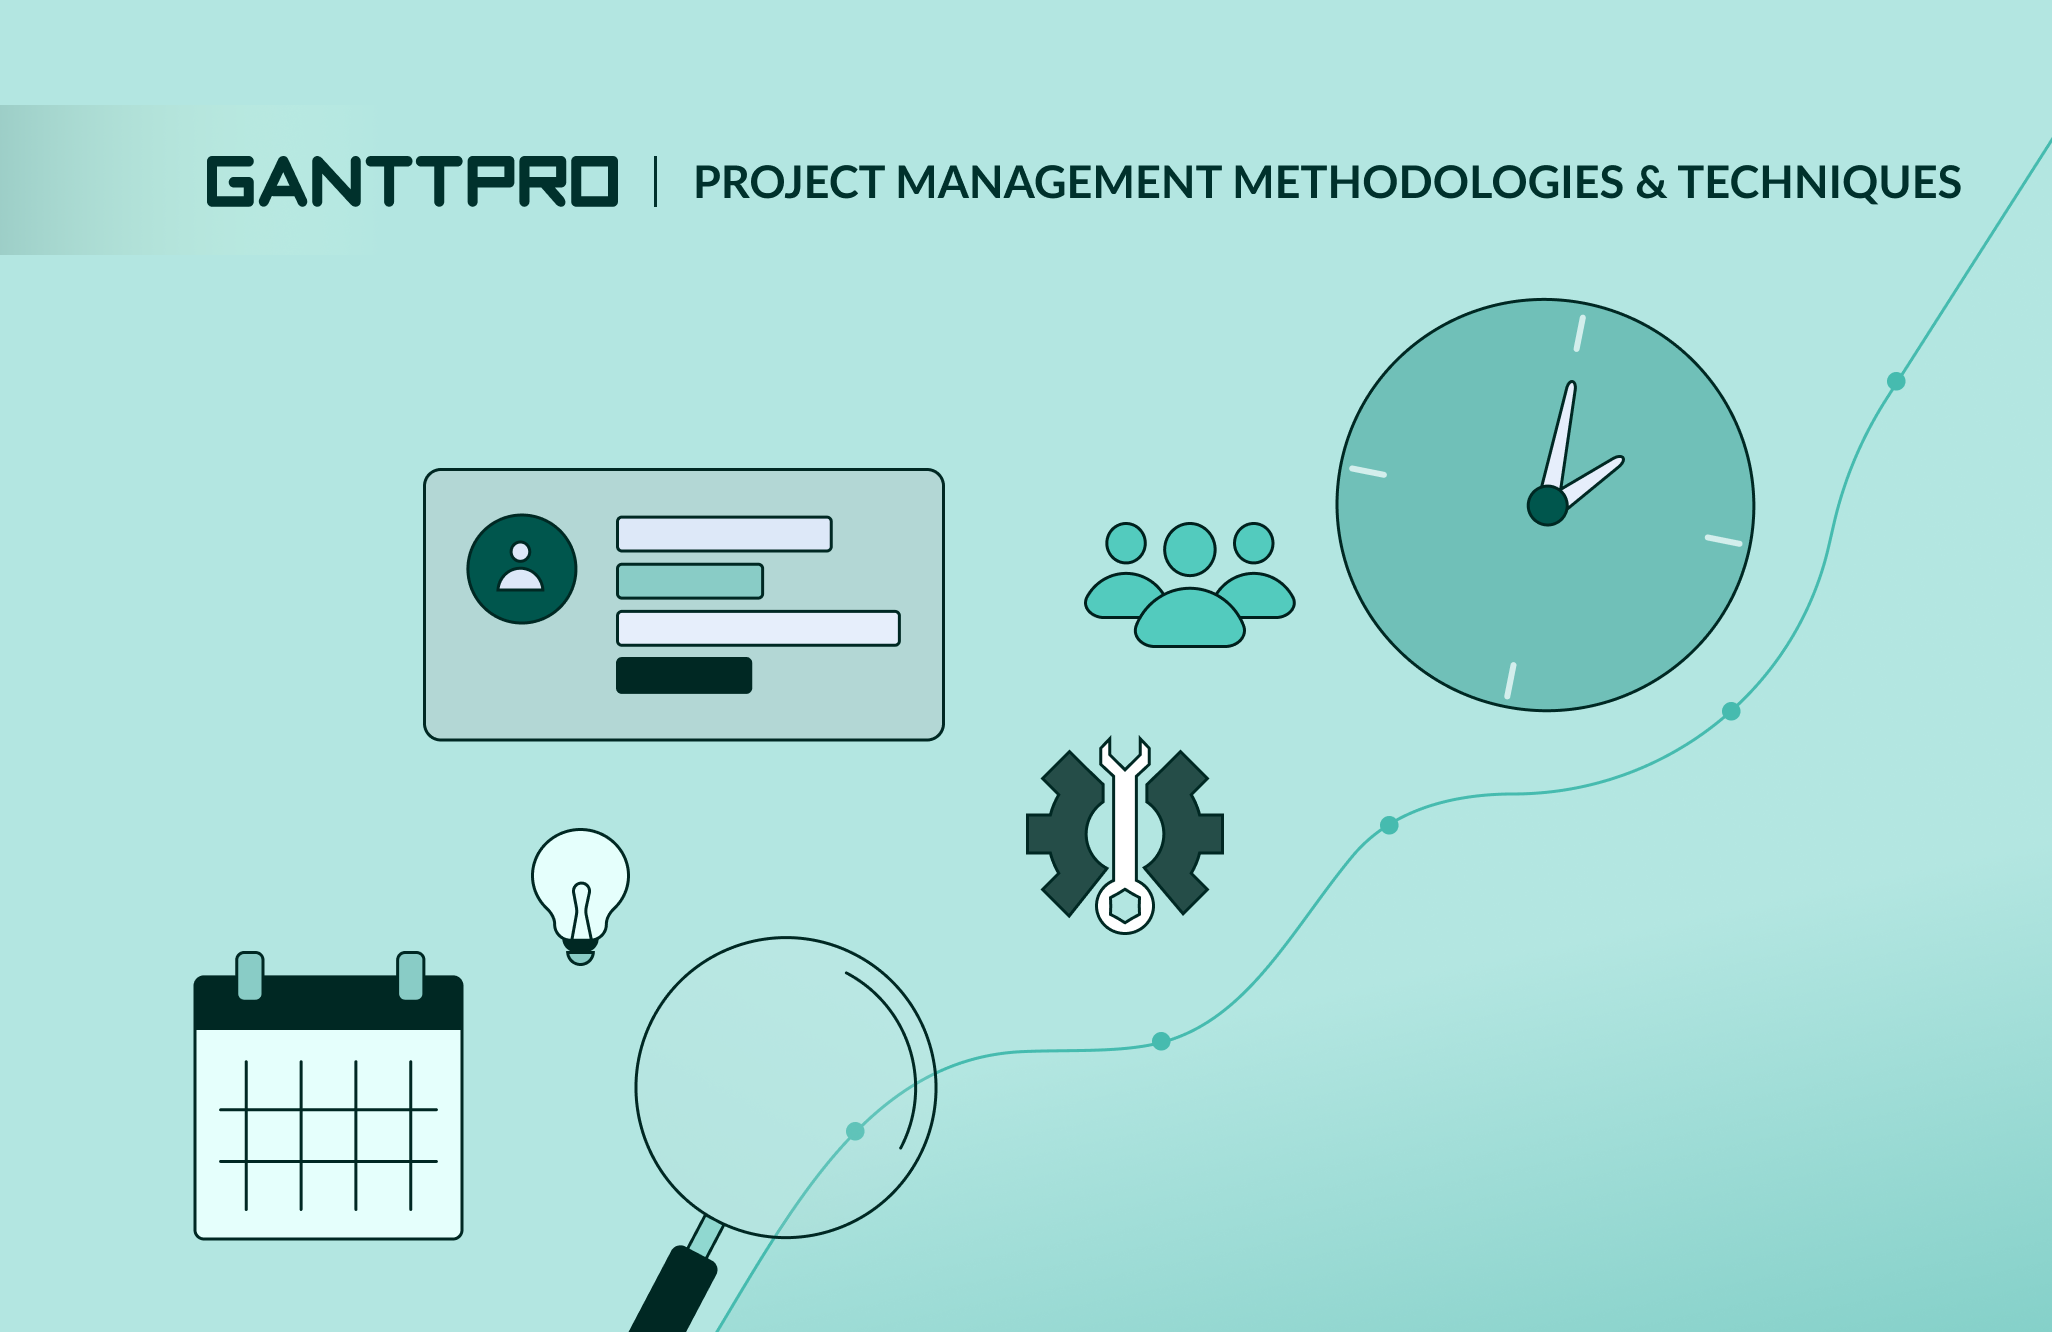 Methodologies and techniques in project management